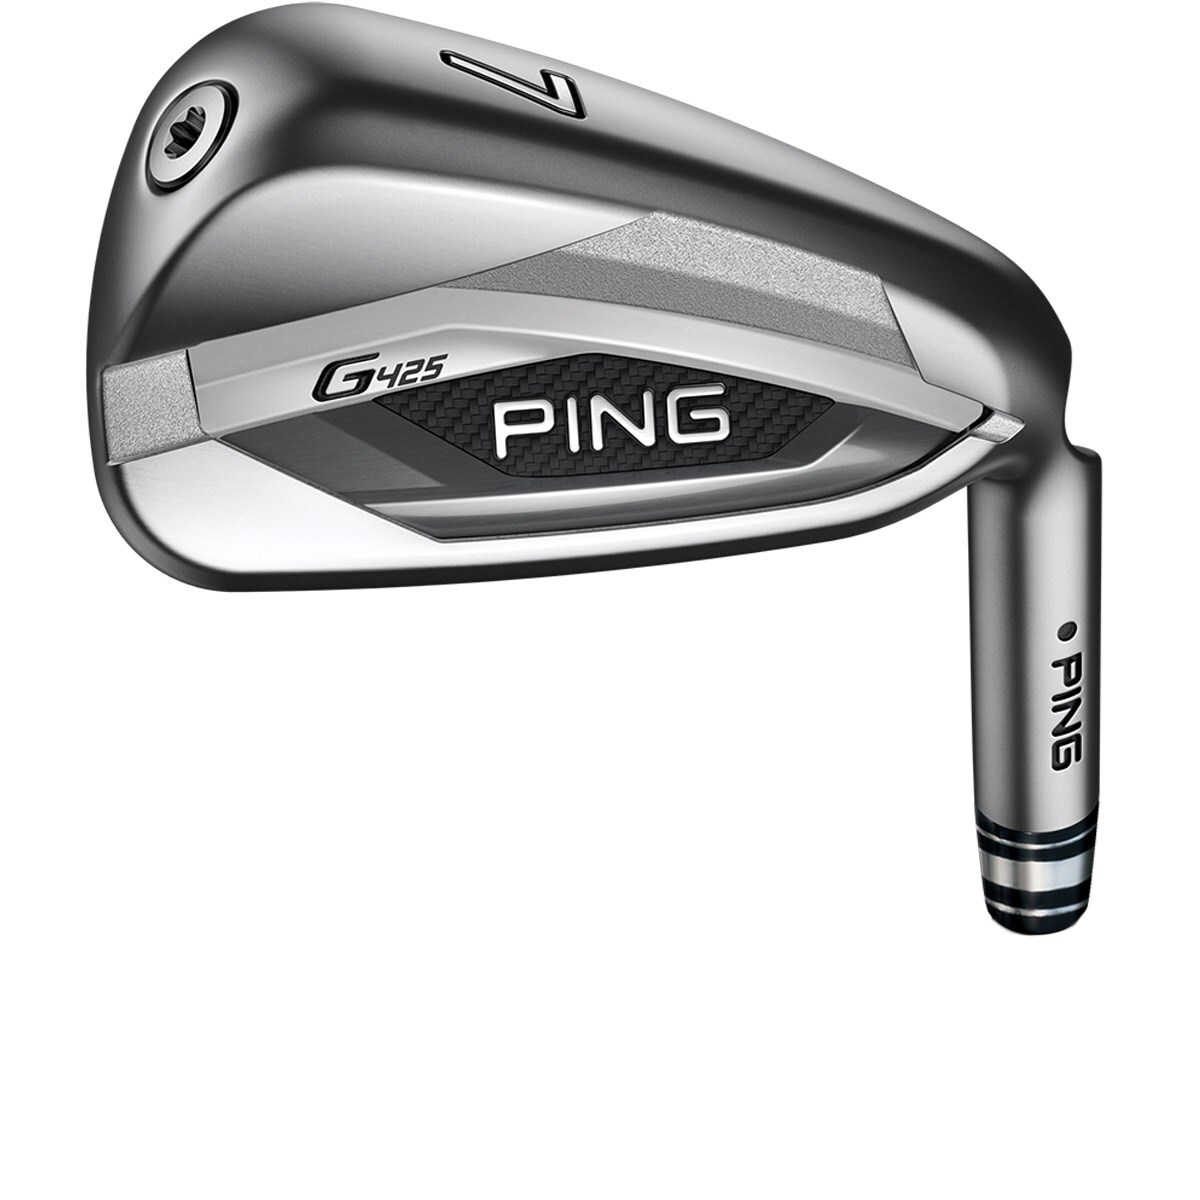 PING G425アイアンセット レフティー用-